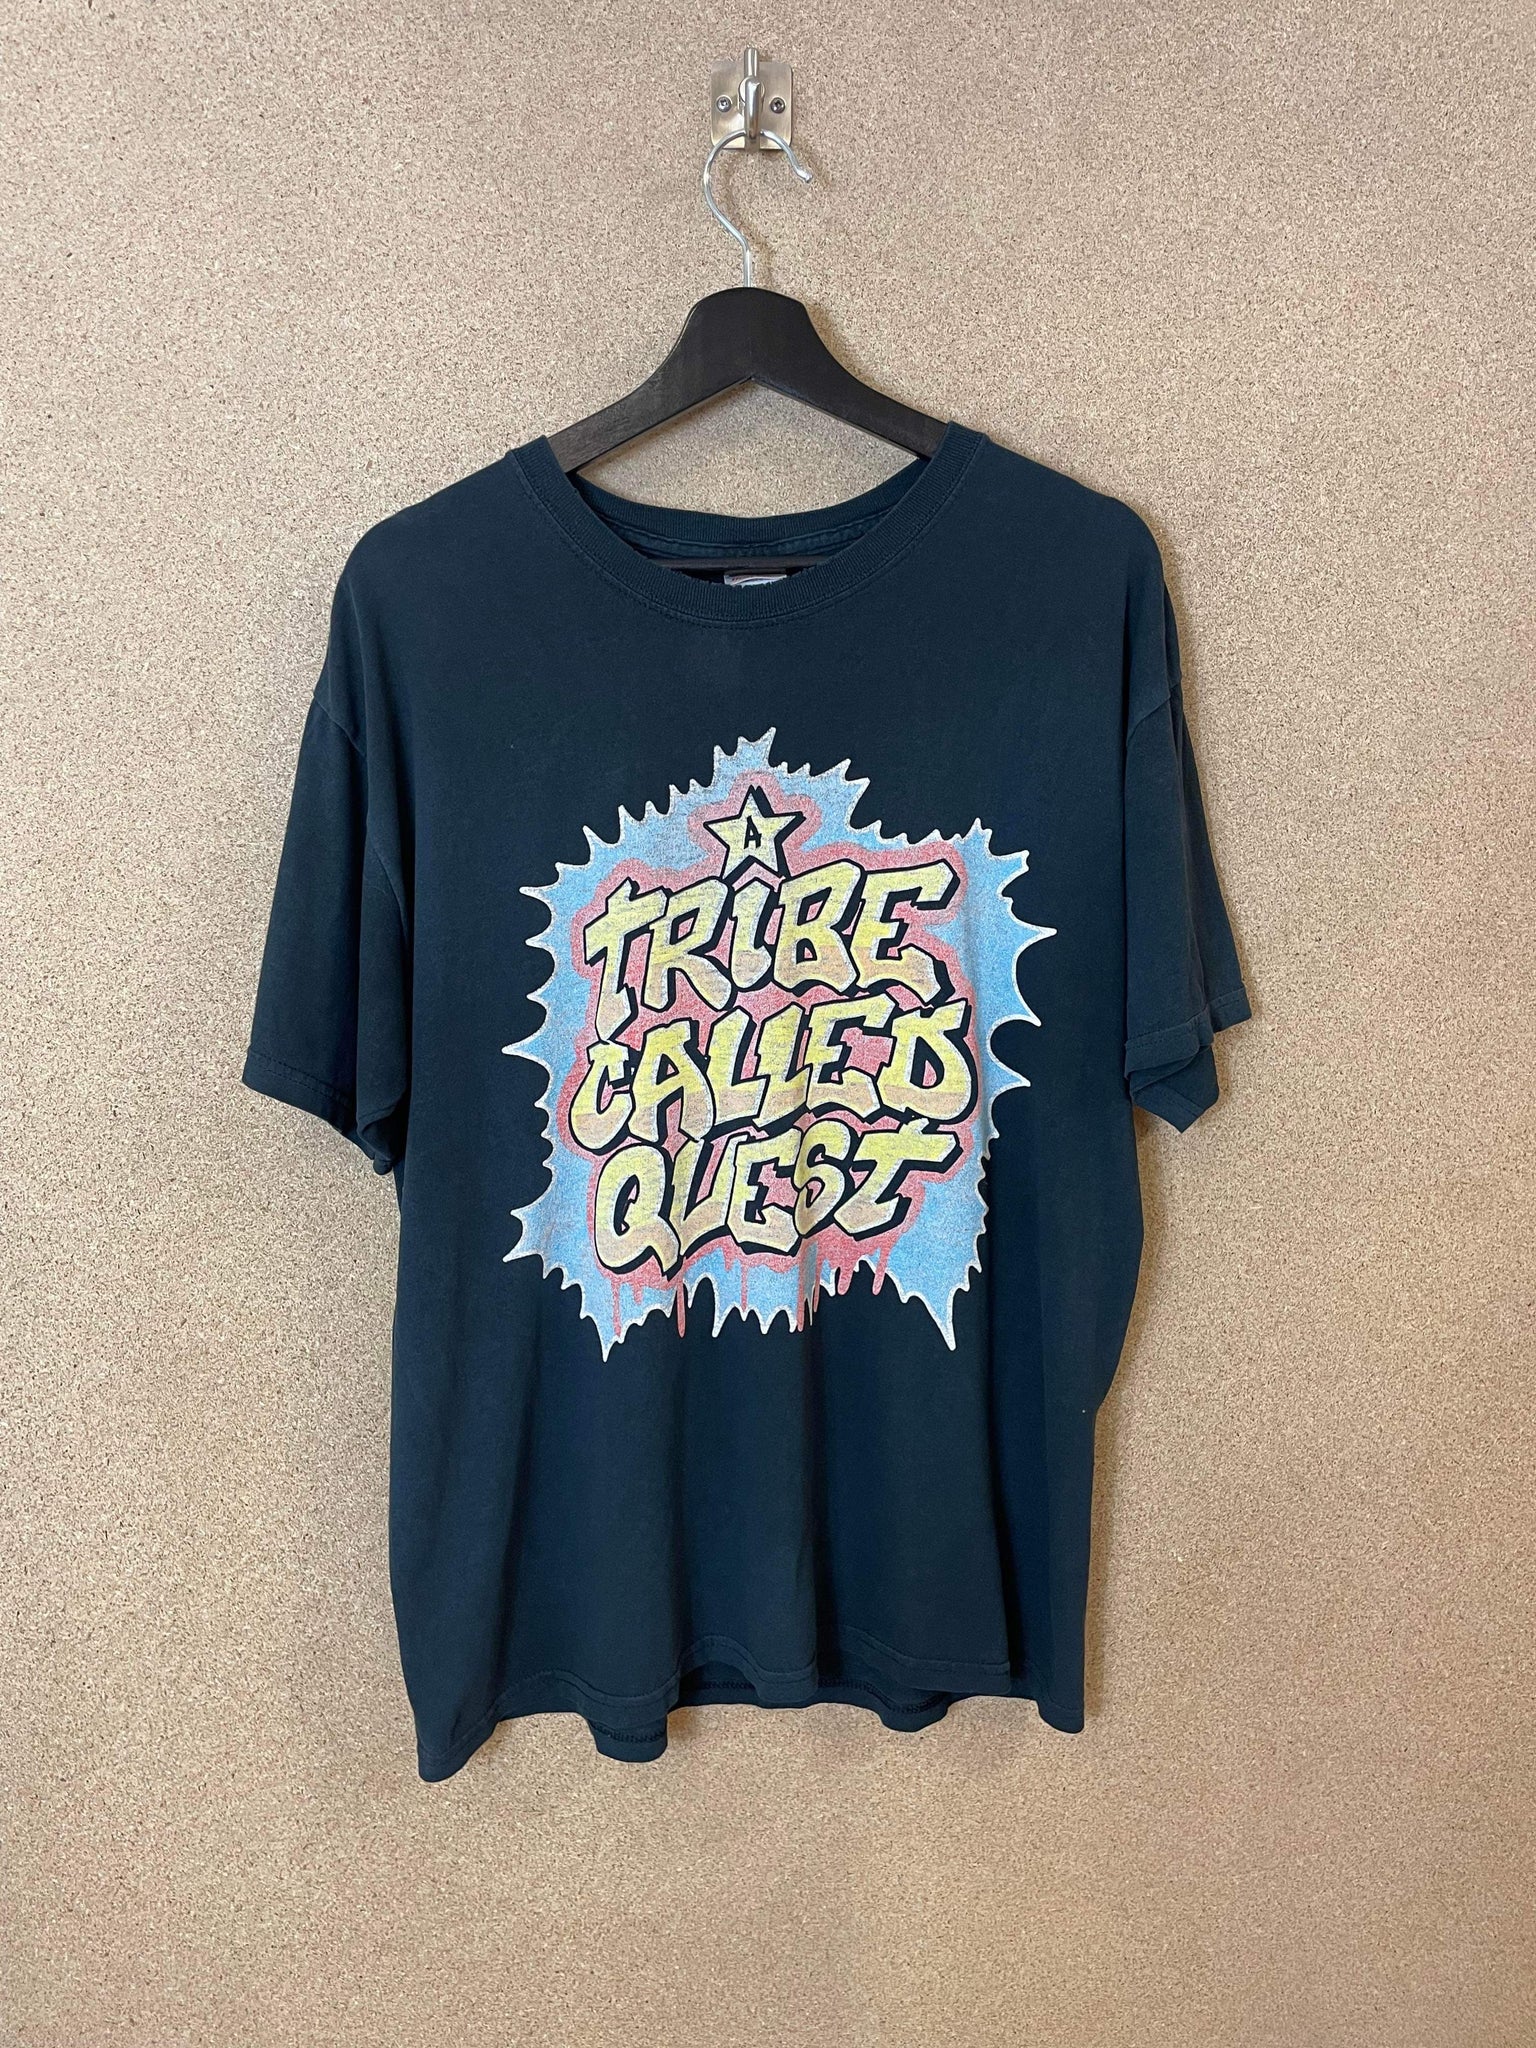 Vintage A Tribe Called Quest 00s Tee - L